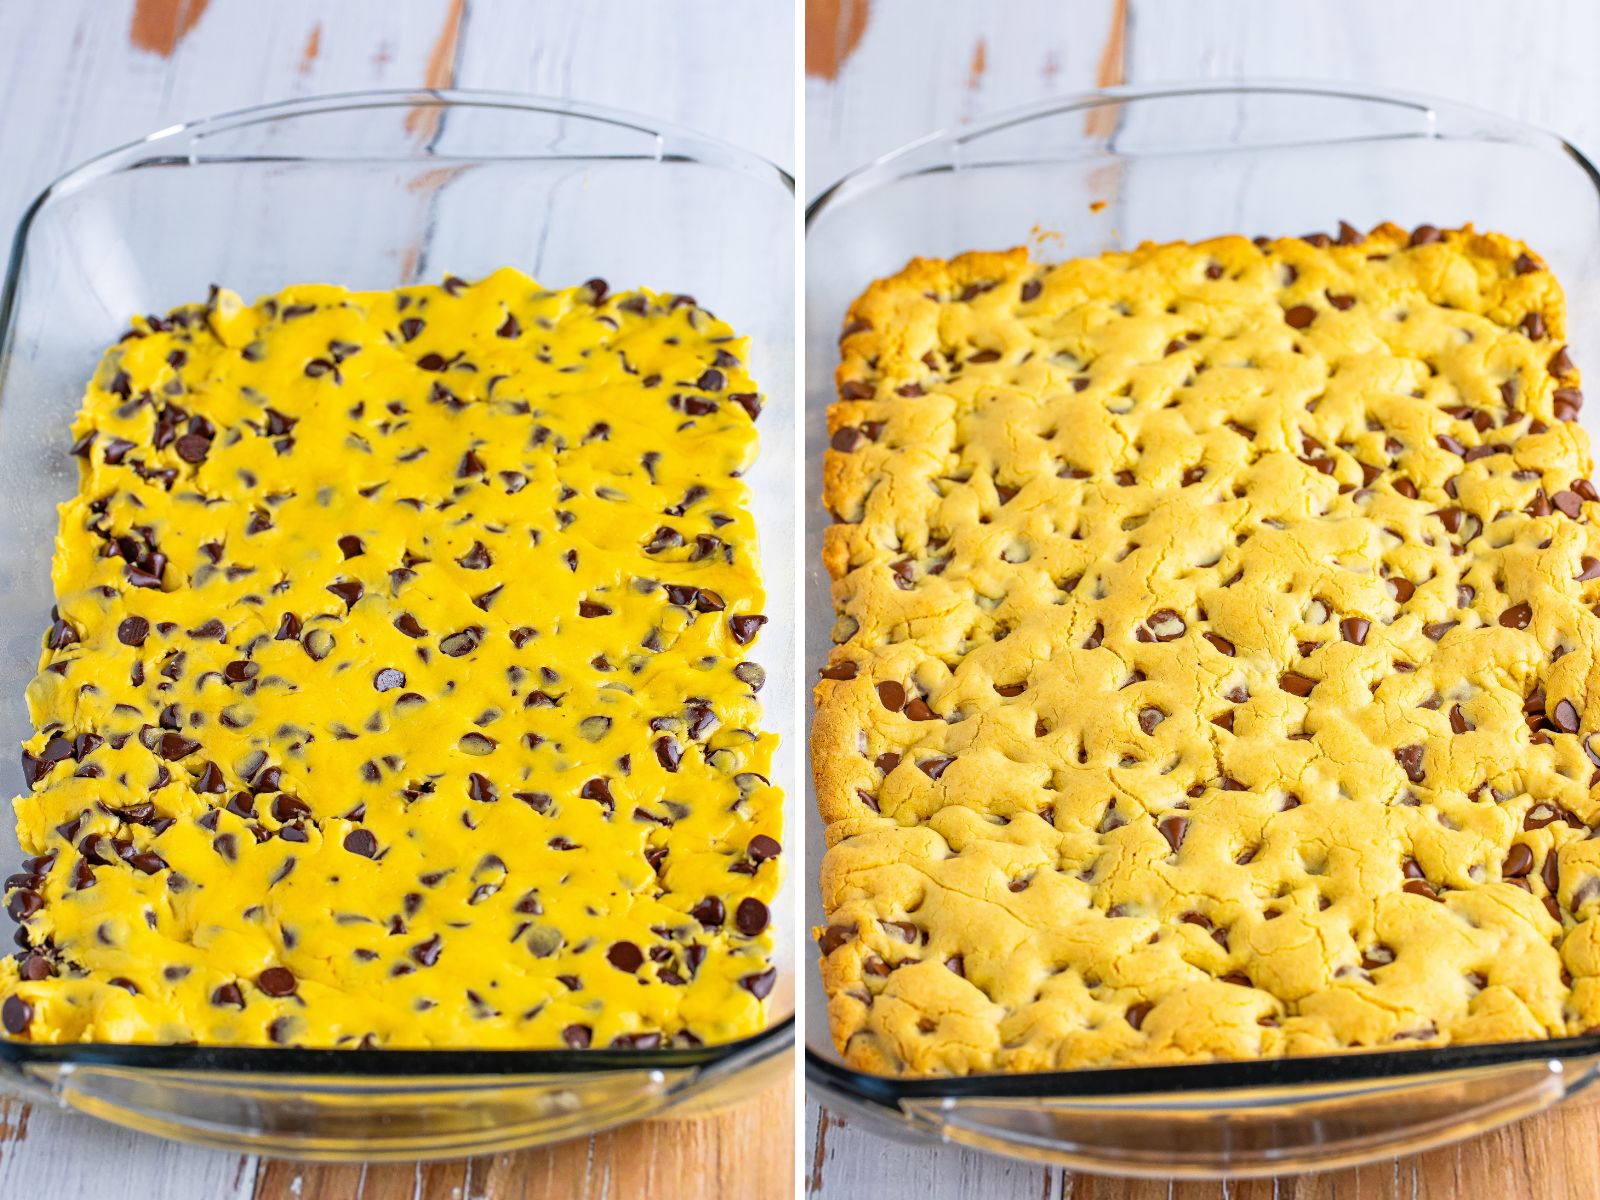 Lazy chocolate chip cookie bars unabked in a dish and a baked chocolate chip cookie bars uncut in a dish.